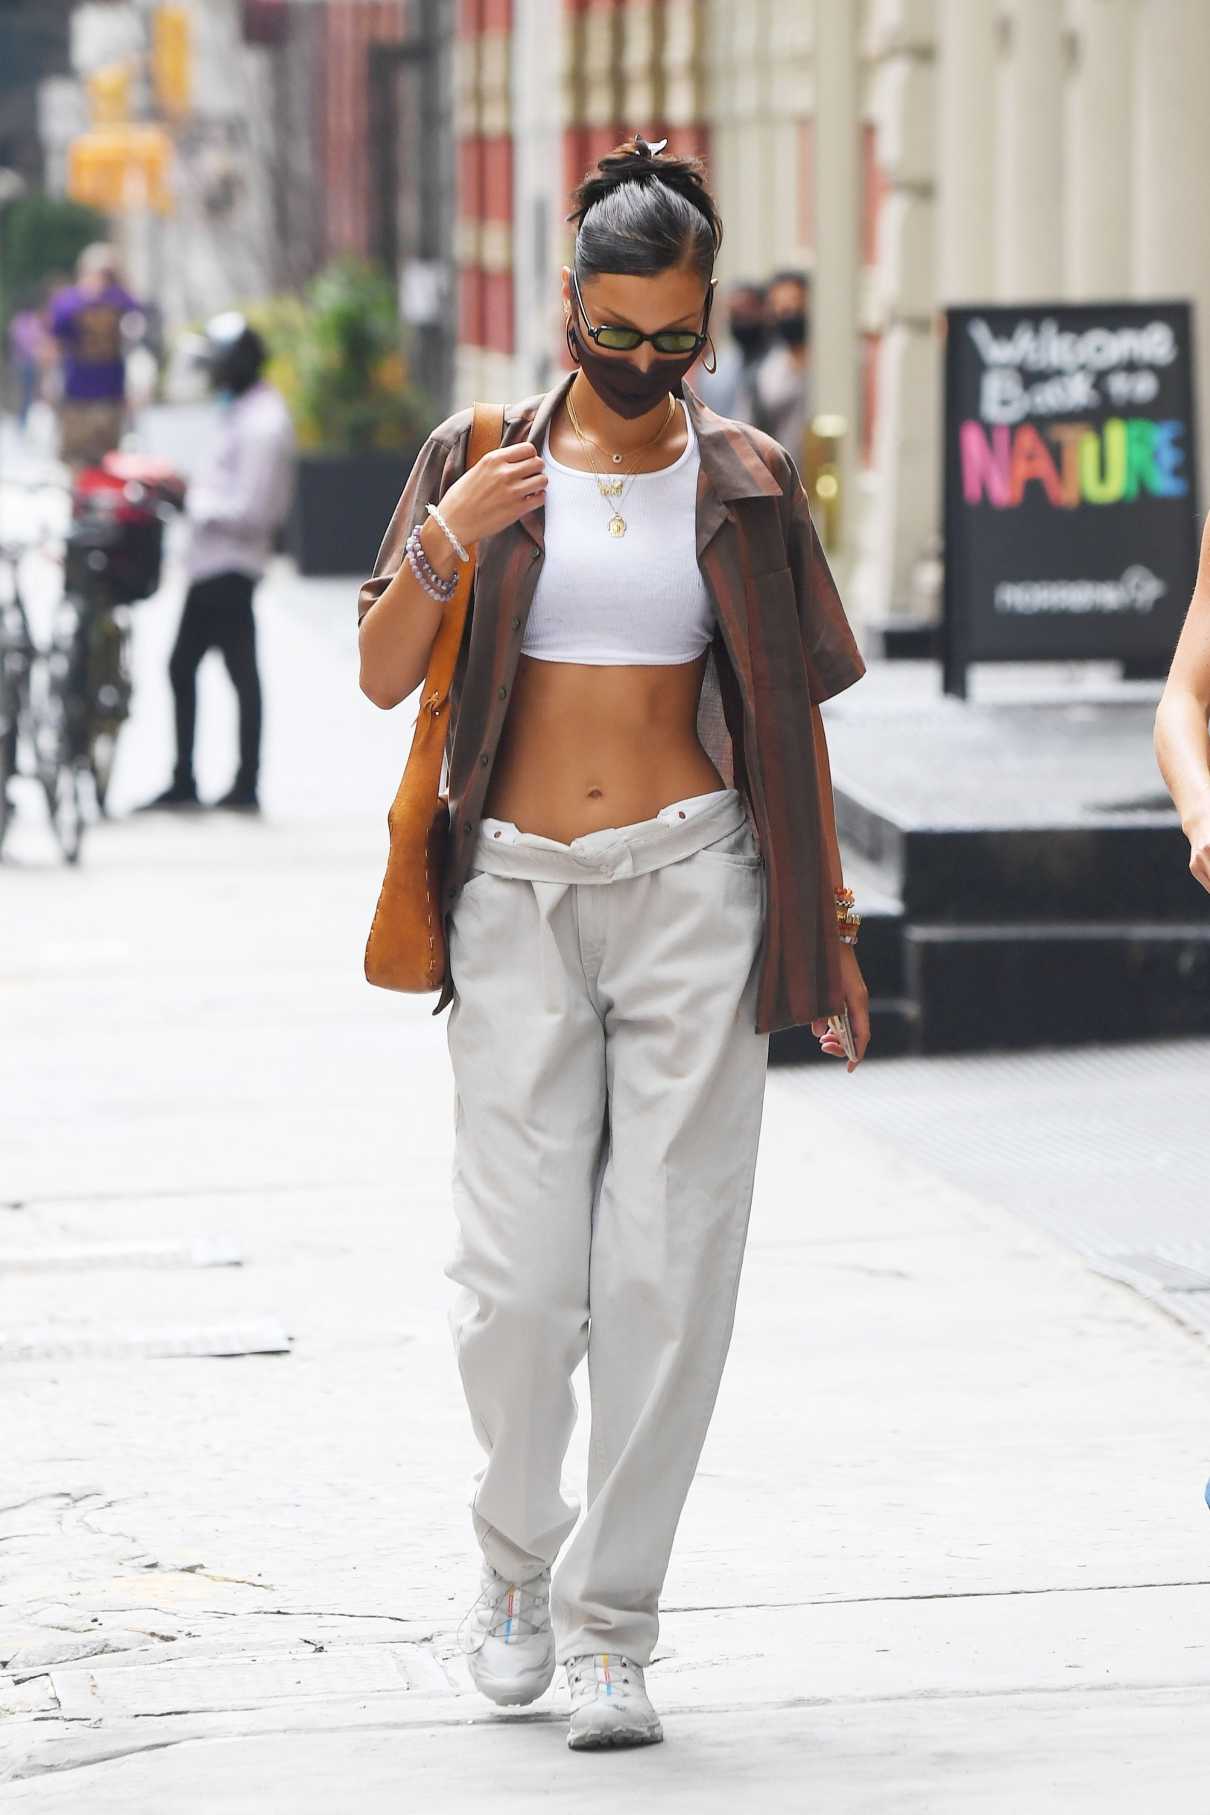 Bella Hadid in a White Sports Bra Goes Shopping with a Friend in New ...